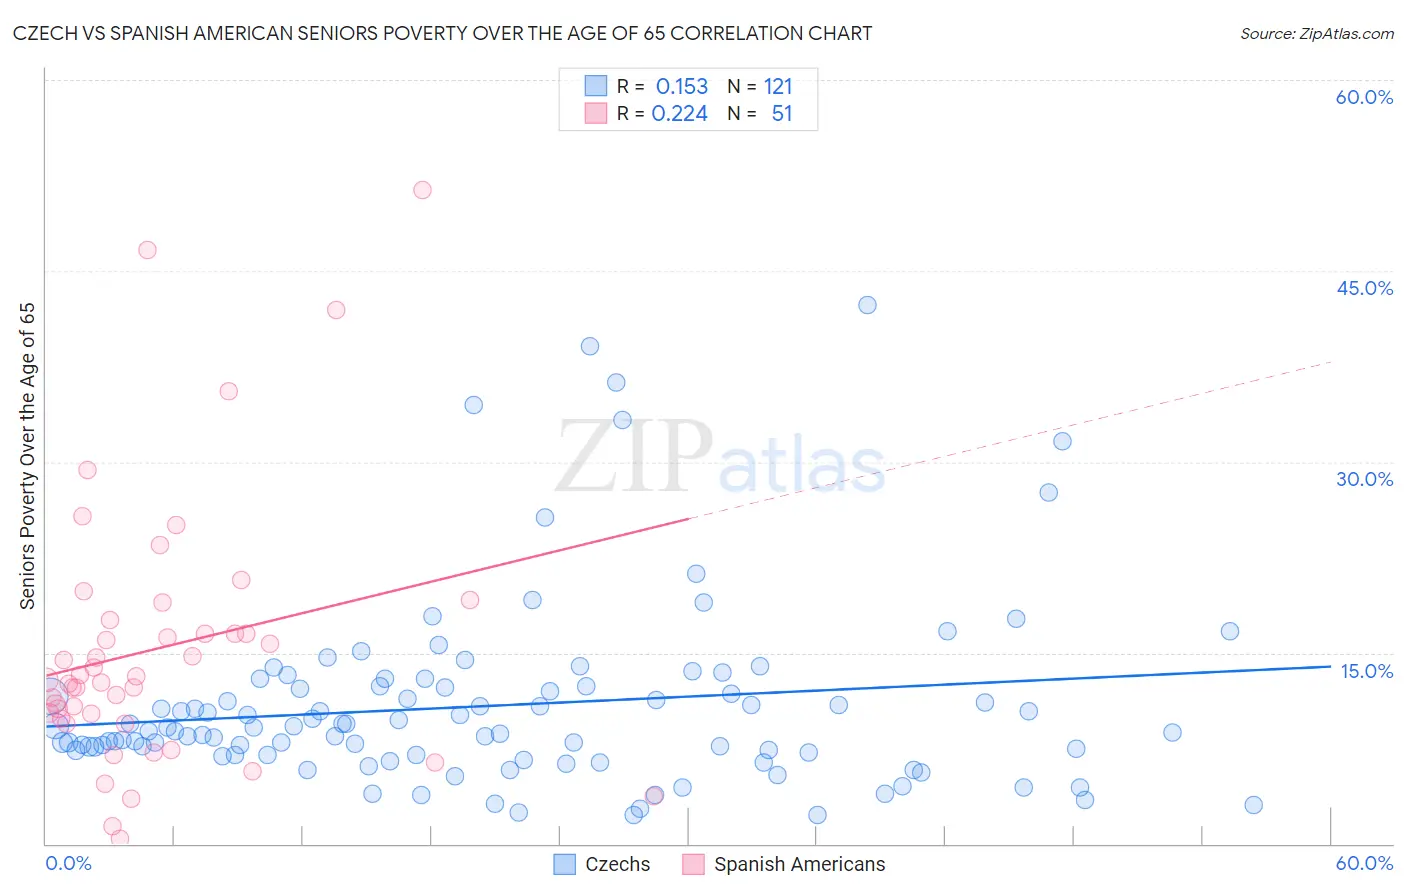 Czech vs Spanish American Seniors Poverty Over the Age of 65